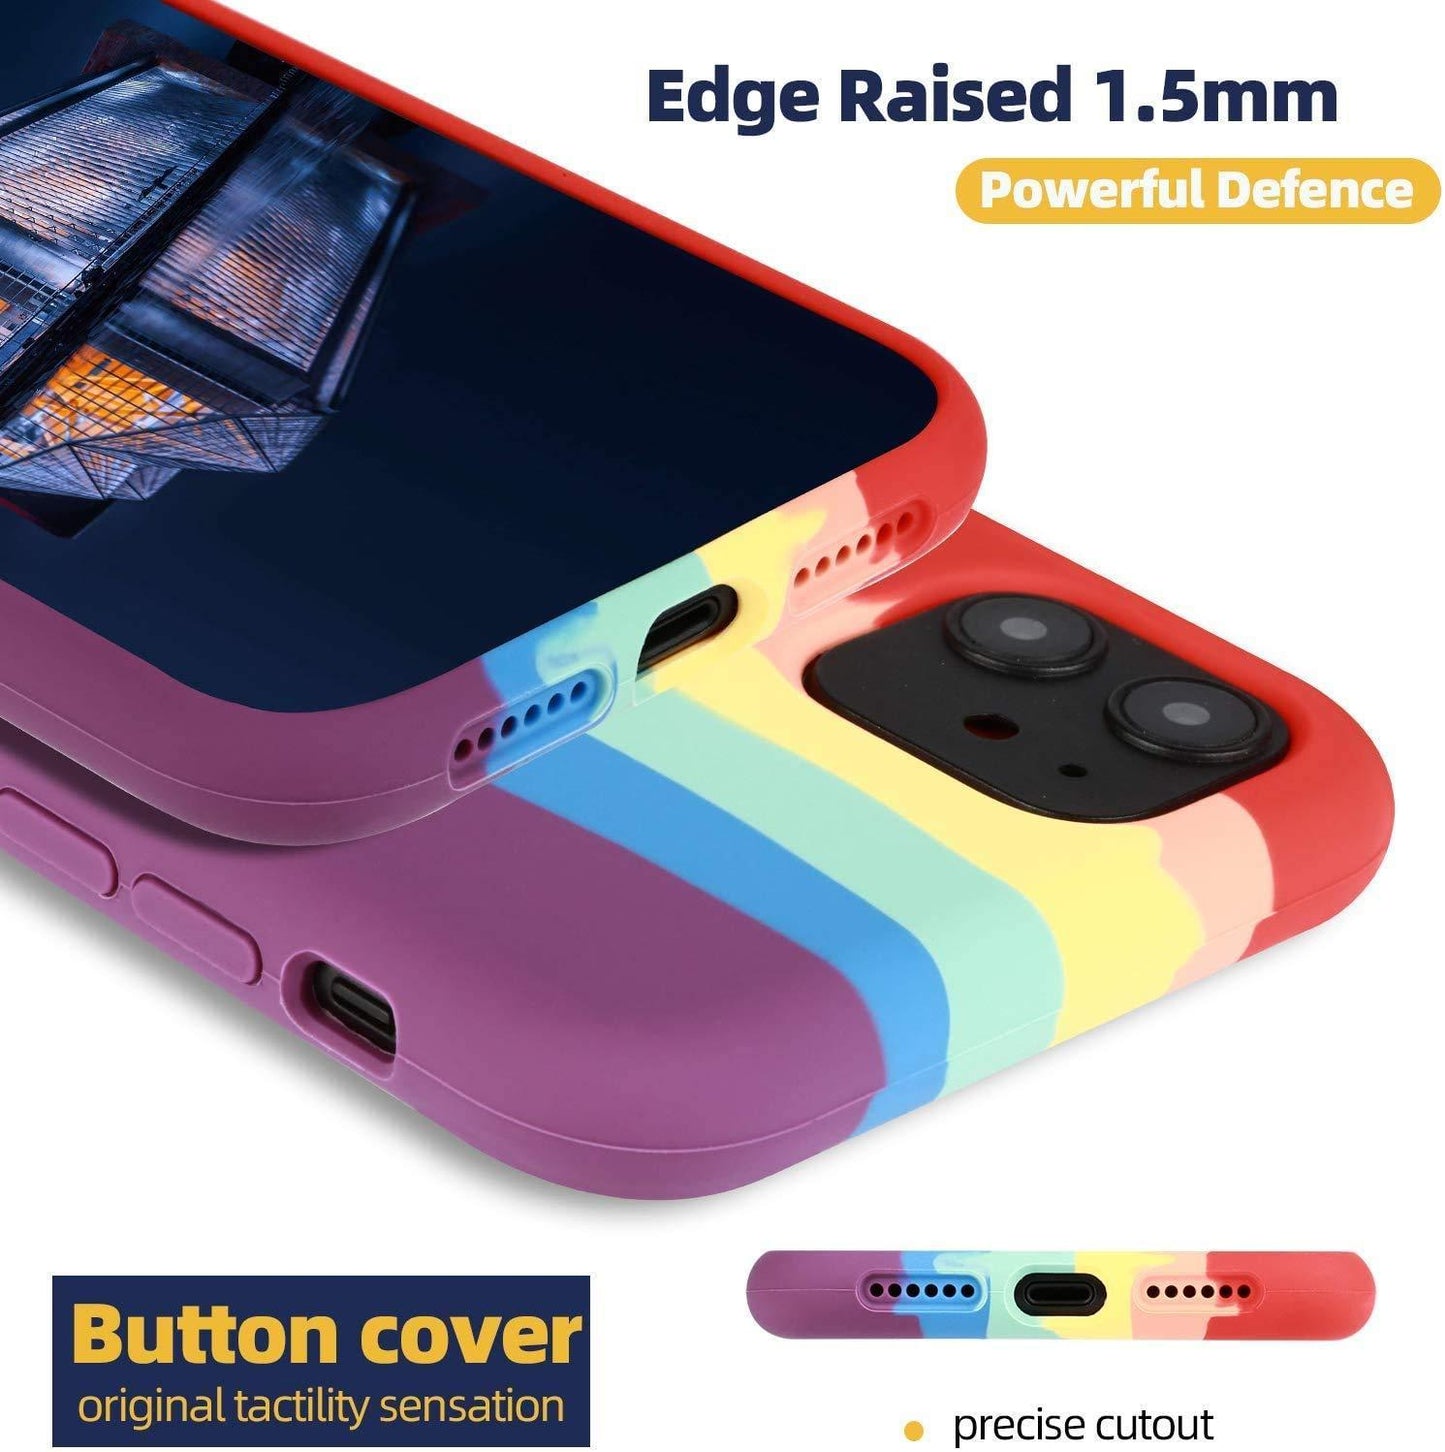 Rainbow Soft Silicon Case For iPhone 11 All Series